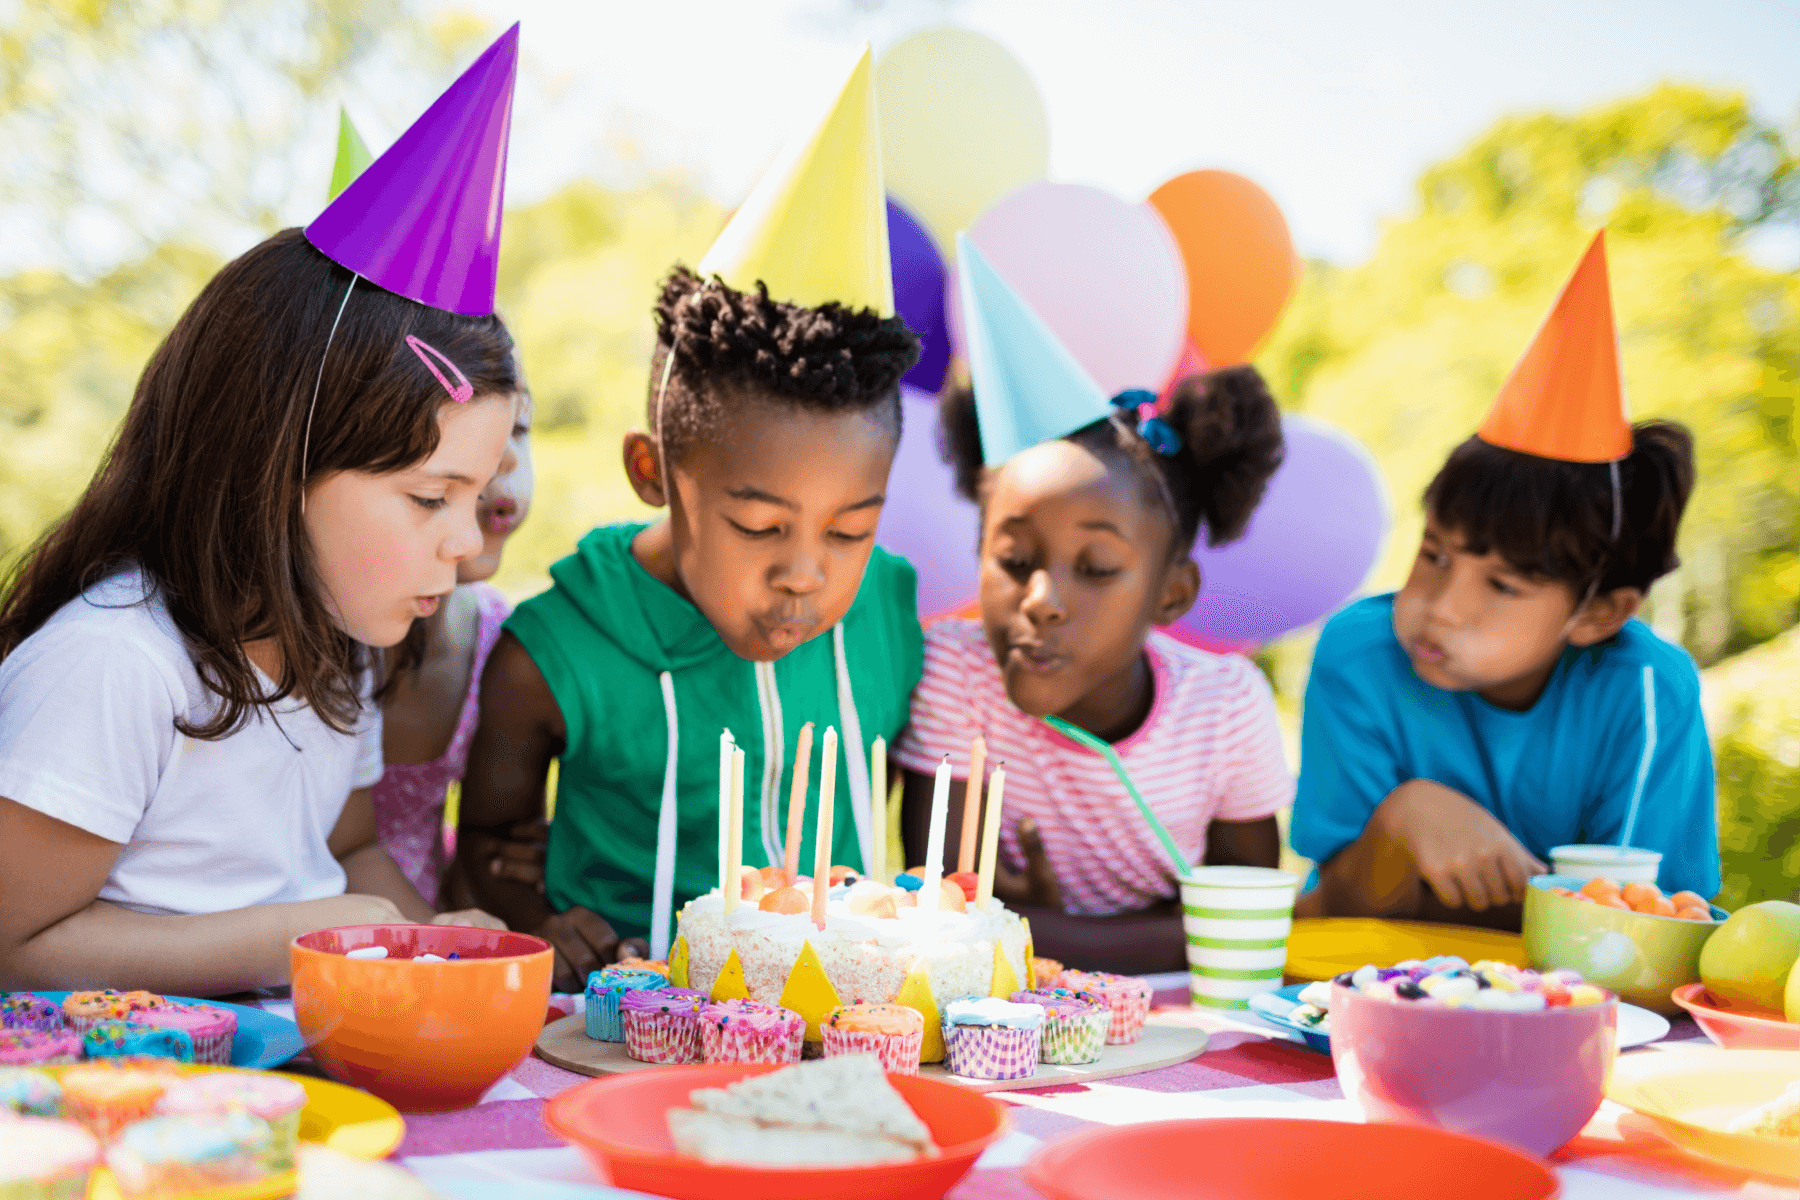 Kids in colorful party hats blow out birthday candles.